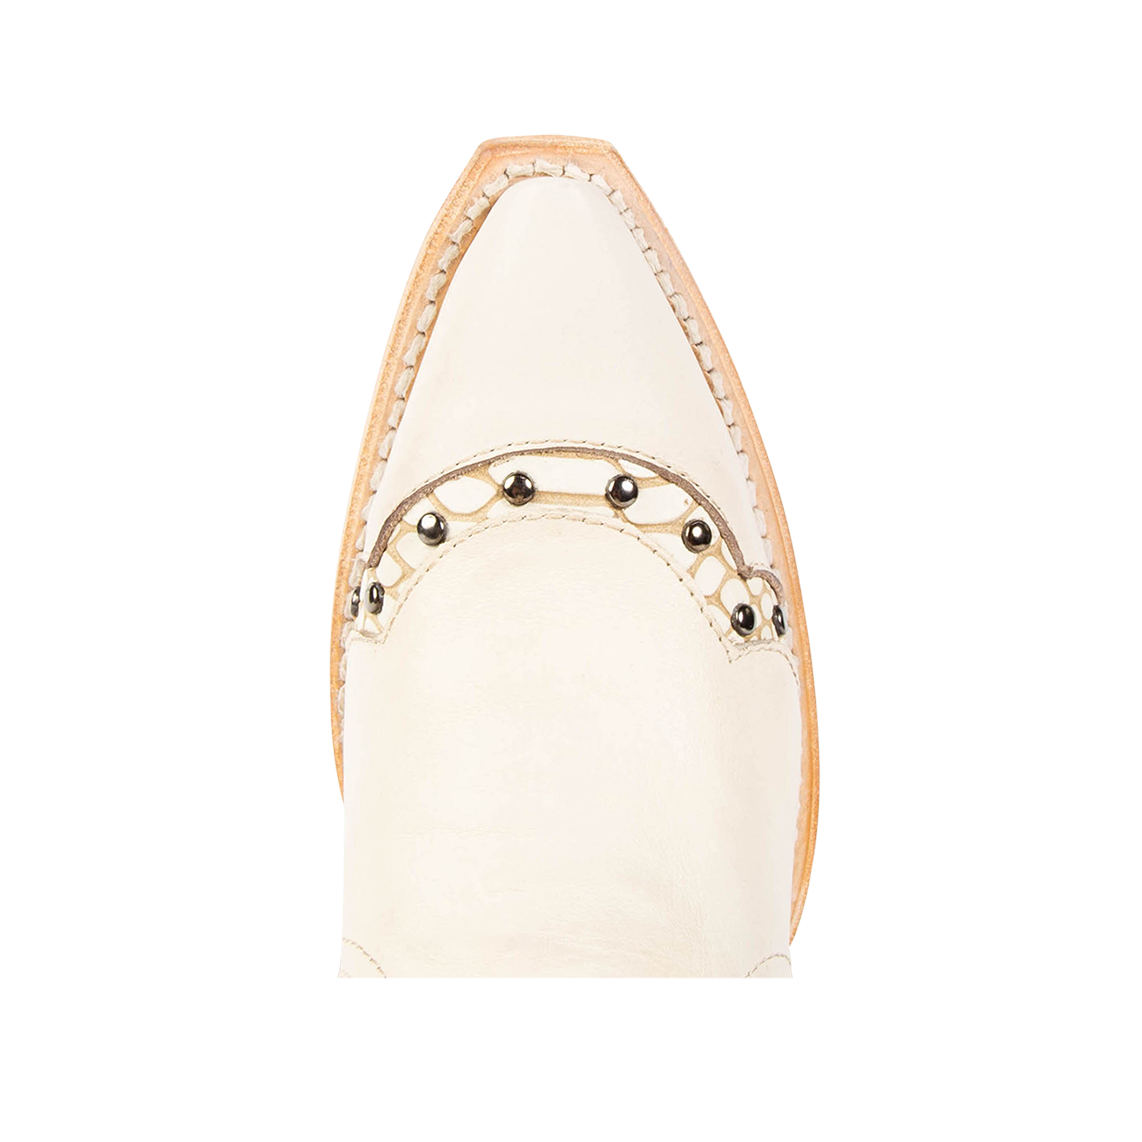 Top view showing snip toe construction with stud detailing on FREEBIRD women's Warner beige leather western cowboy boot